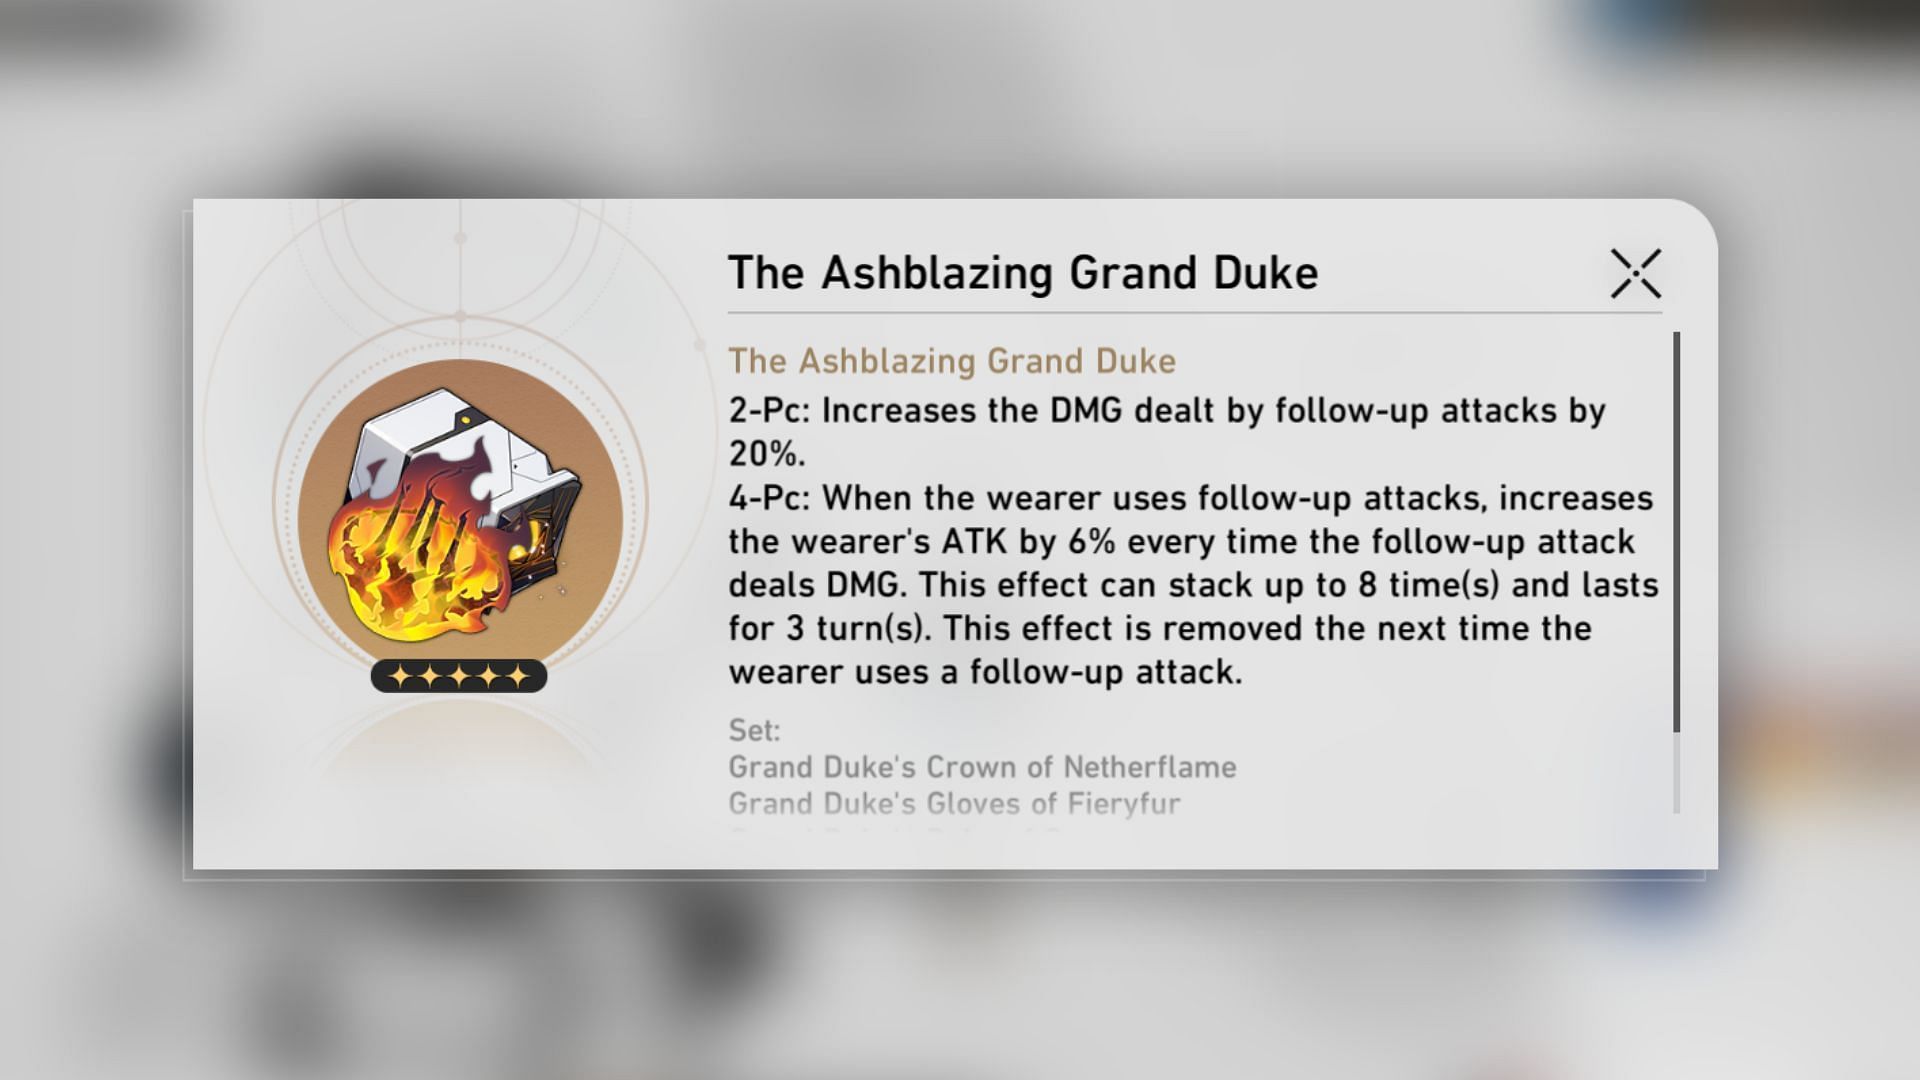 Image showing The Ashblazing Grand Duke Relic and its description